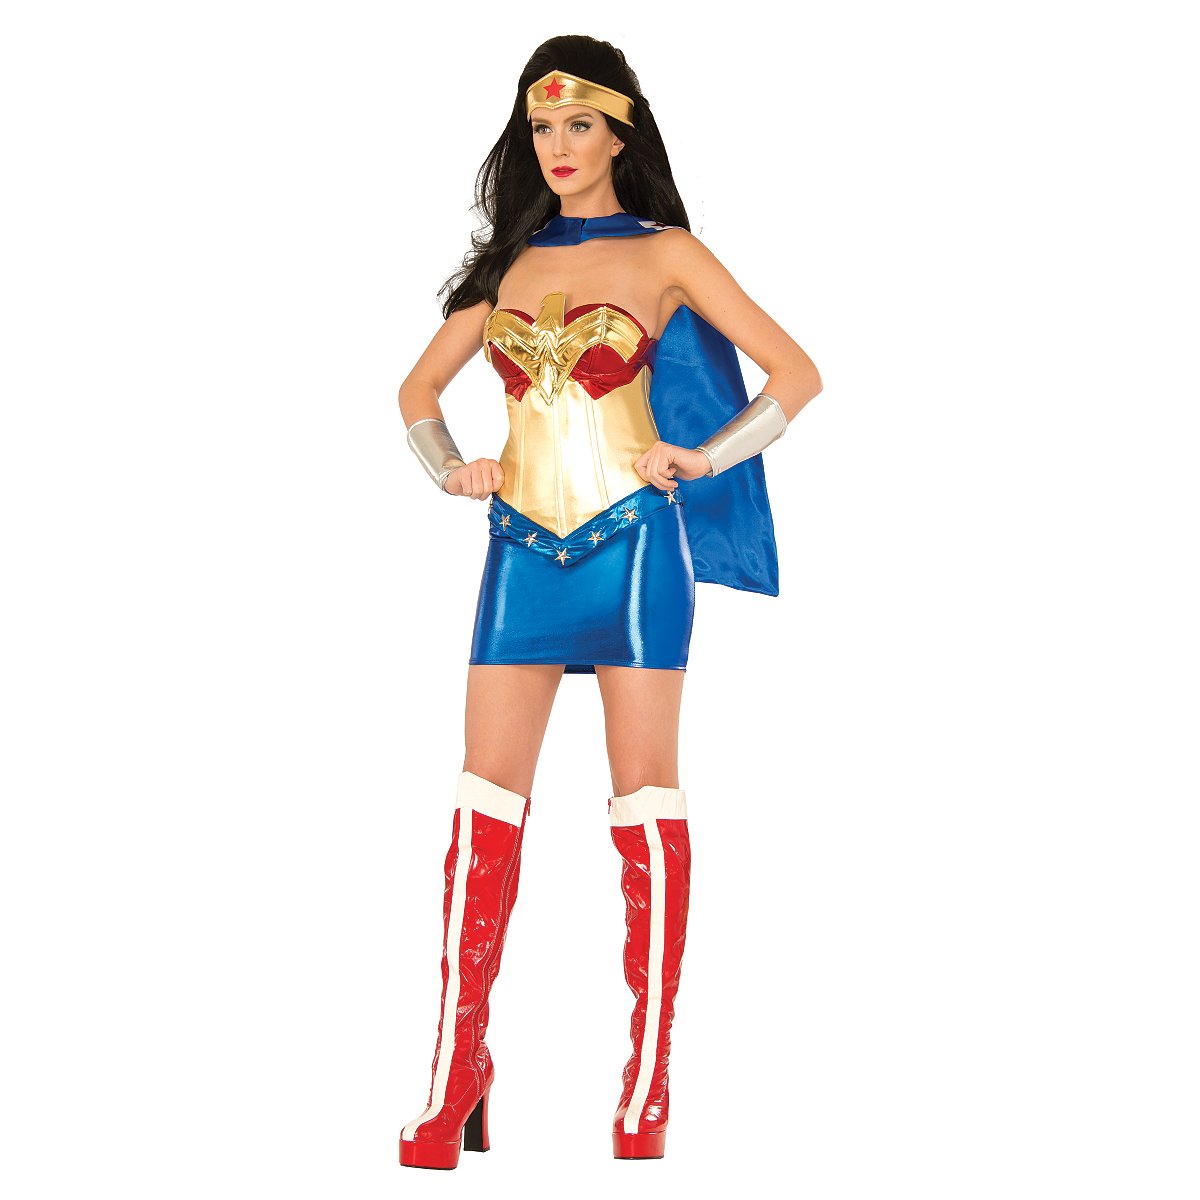 Adult Wonder Woman Costume Deluxe - DC Super Hero Girls - Size ADULT LARGE - by Spencer's